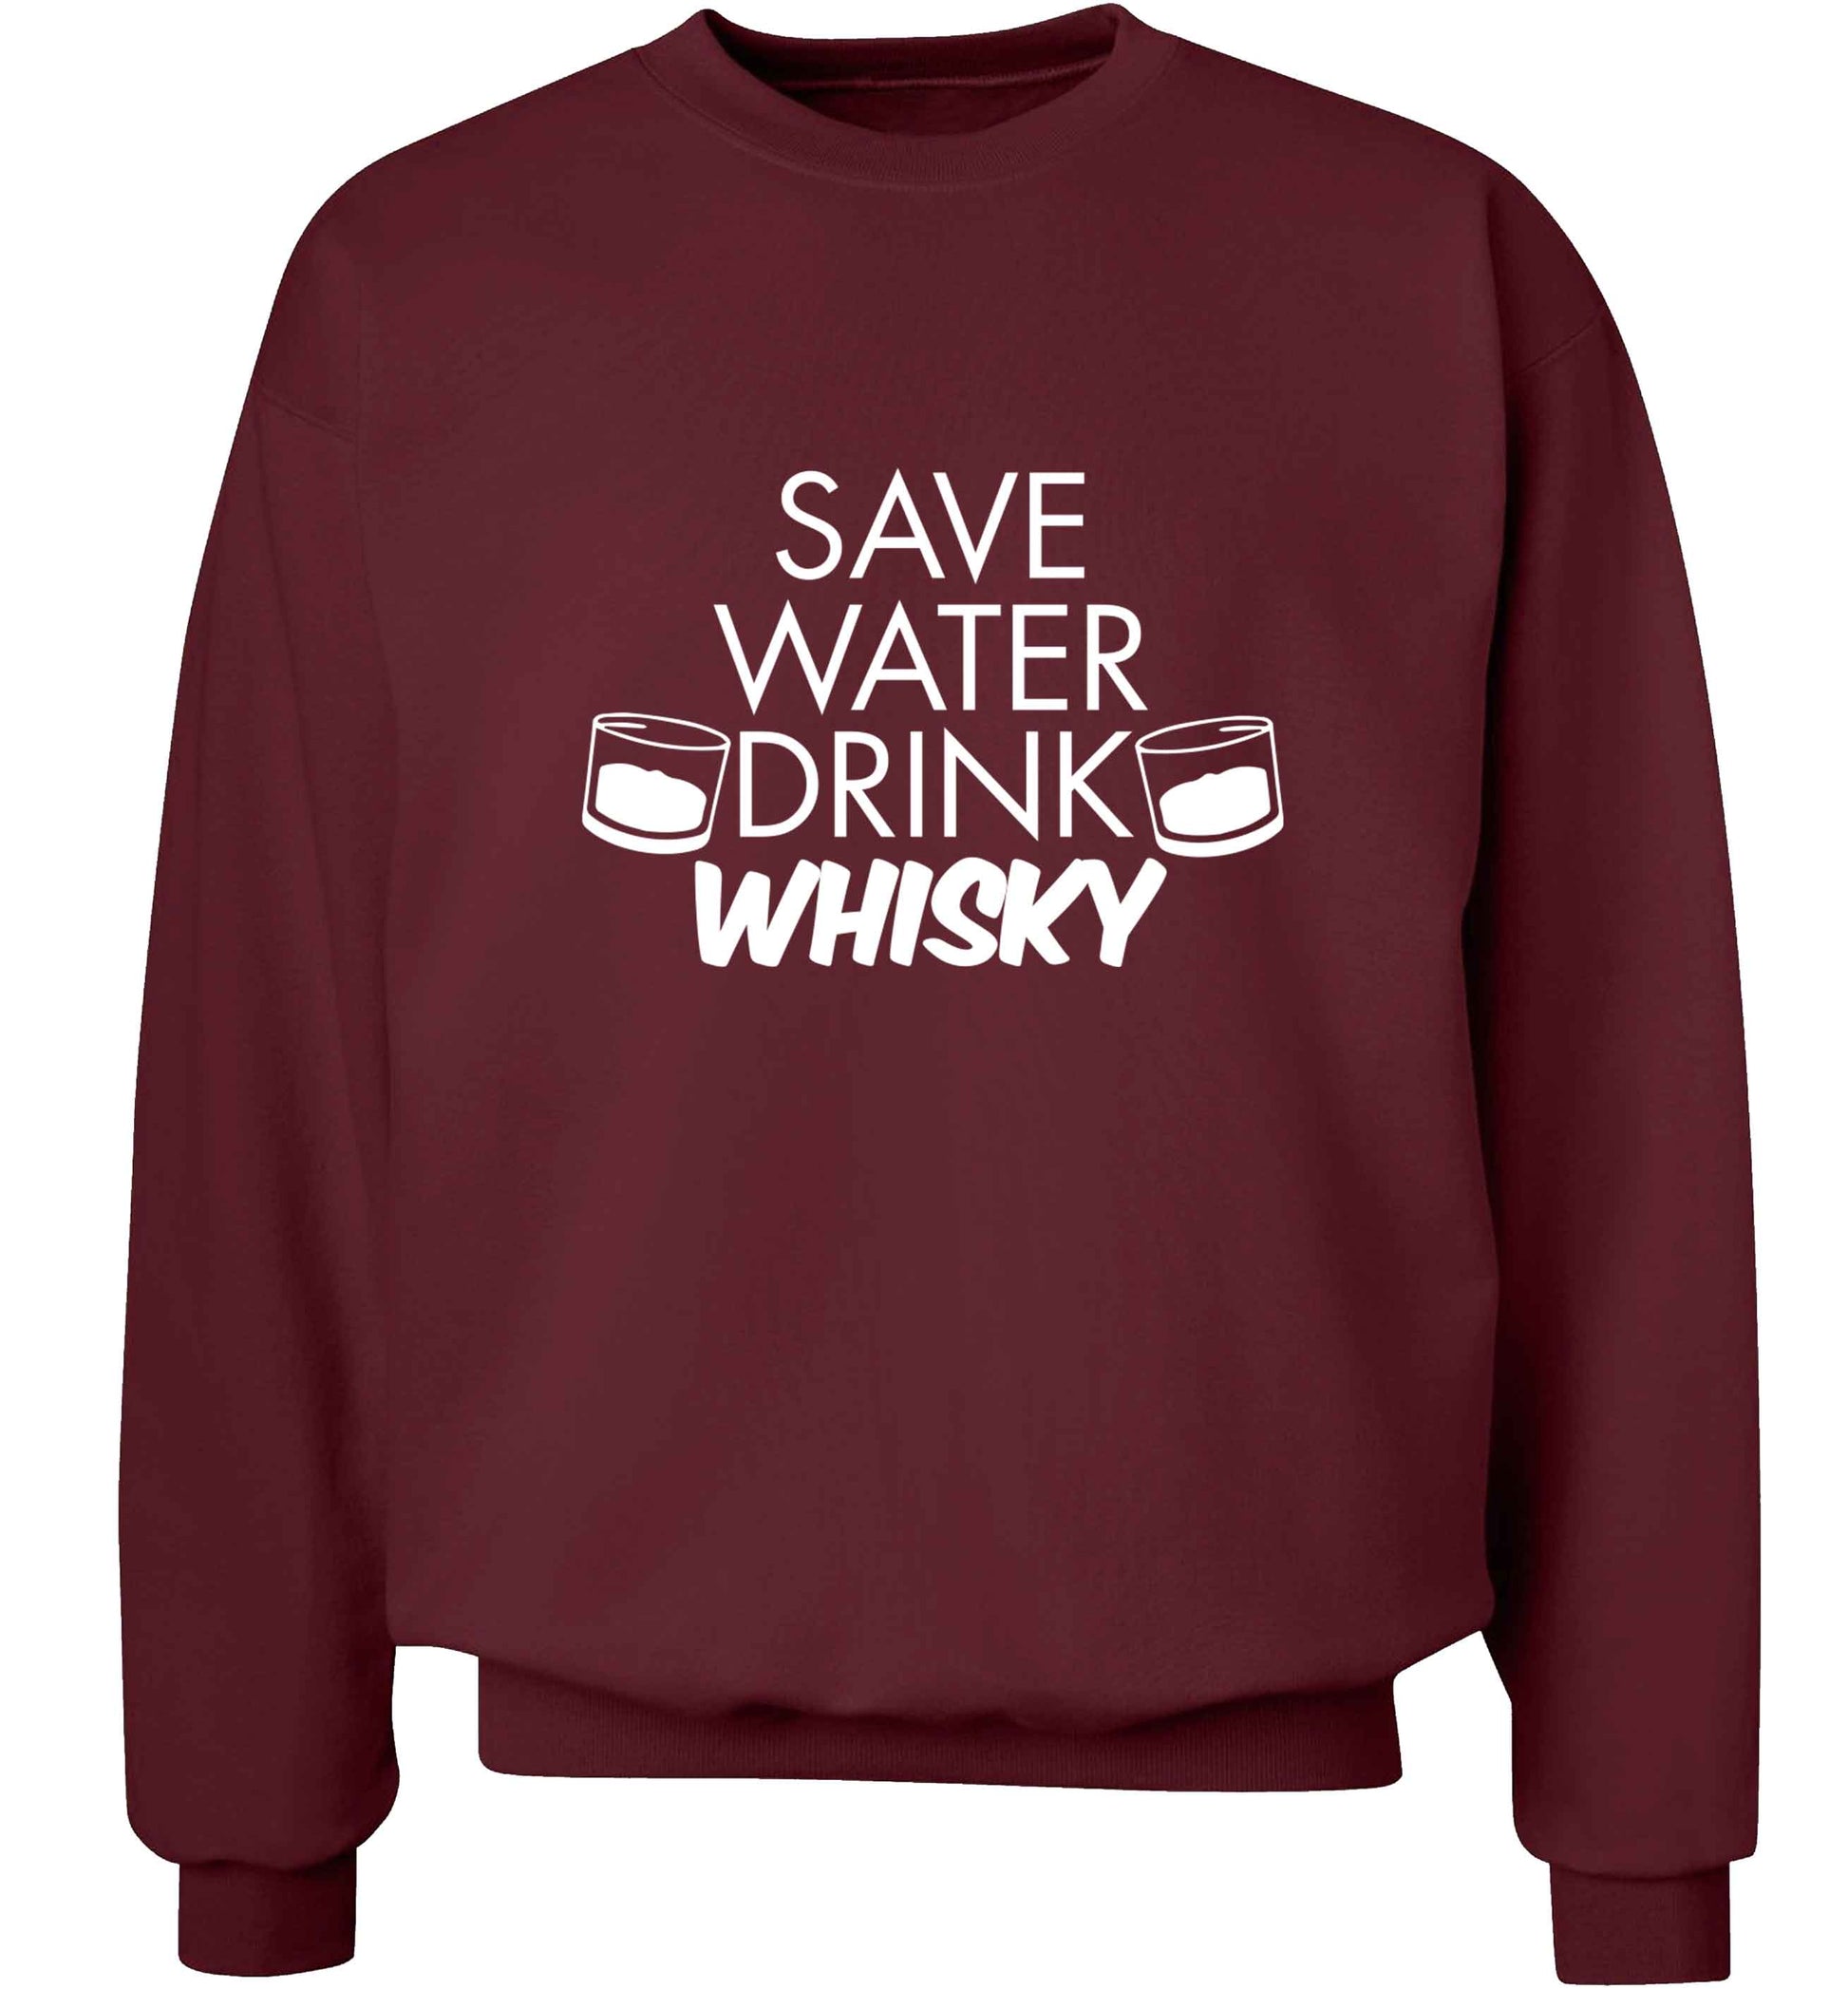 Save water drink whisky adult's unisex maroon sweater 2XL